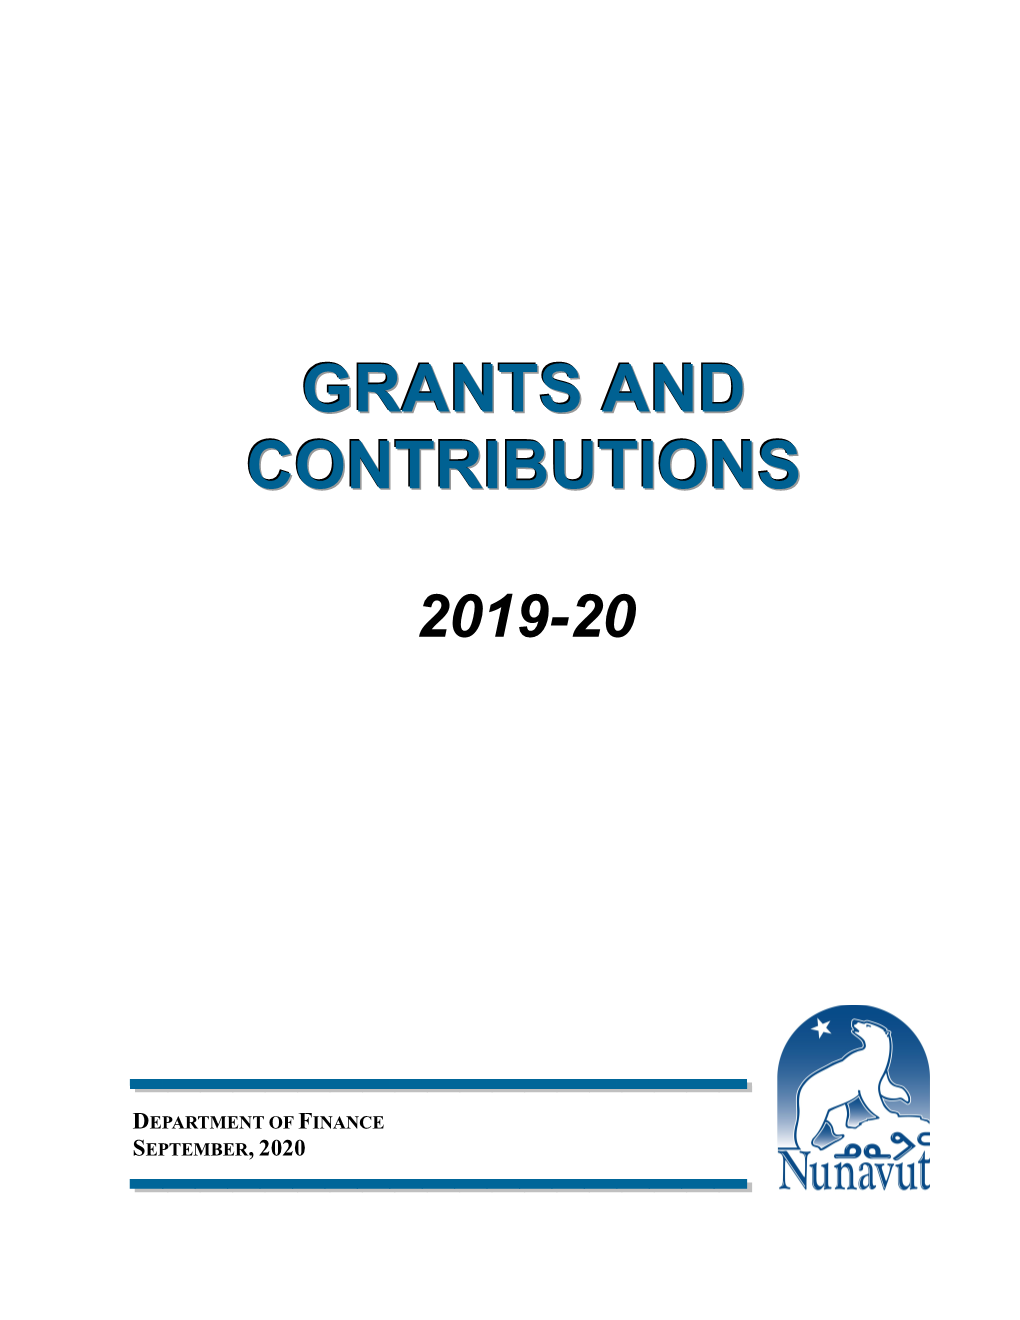 2019-20 Grants and Contributions by Department, Including Recipient, Amount and Purpose of the Funds